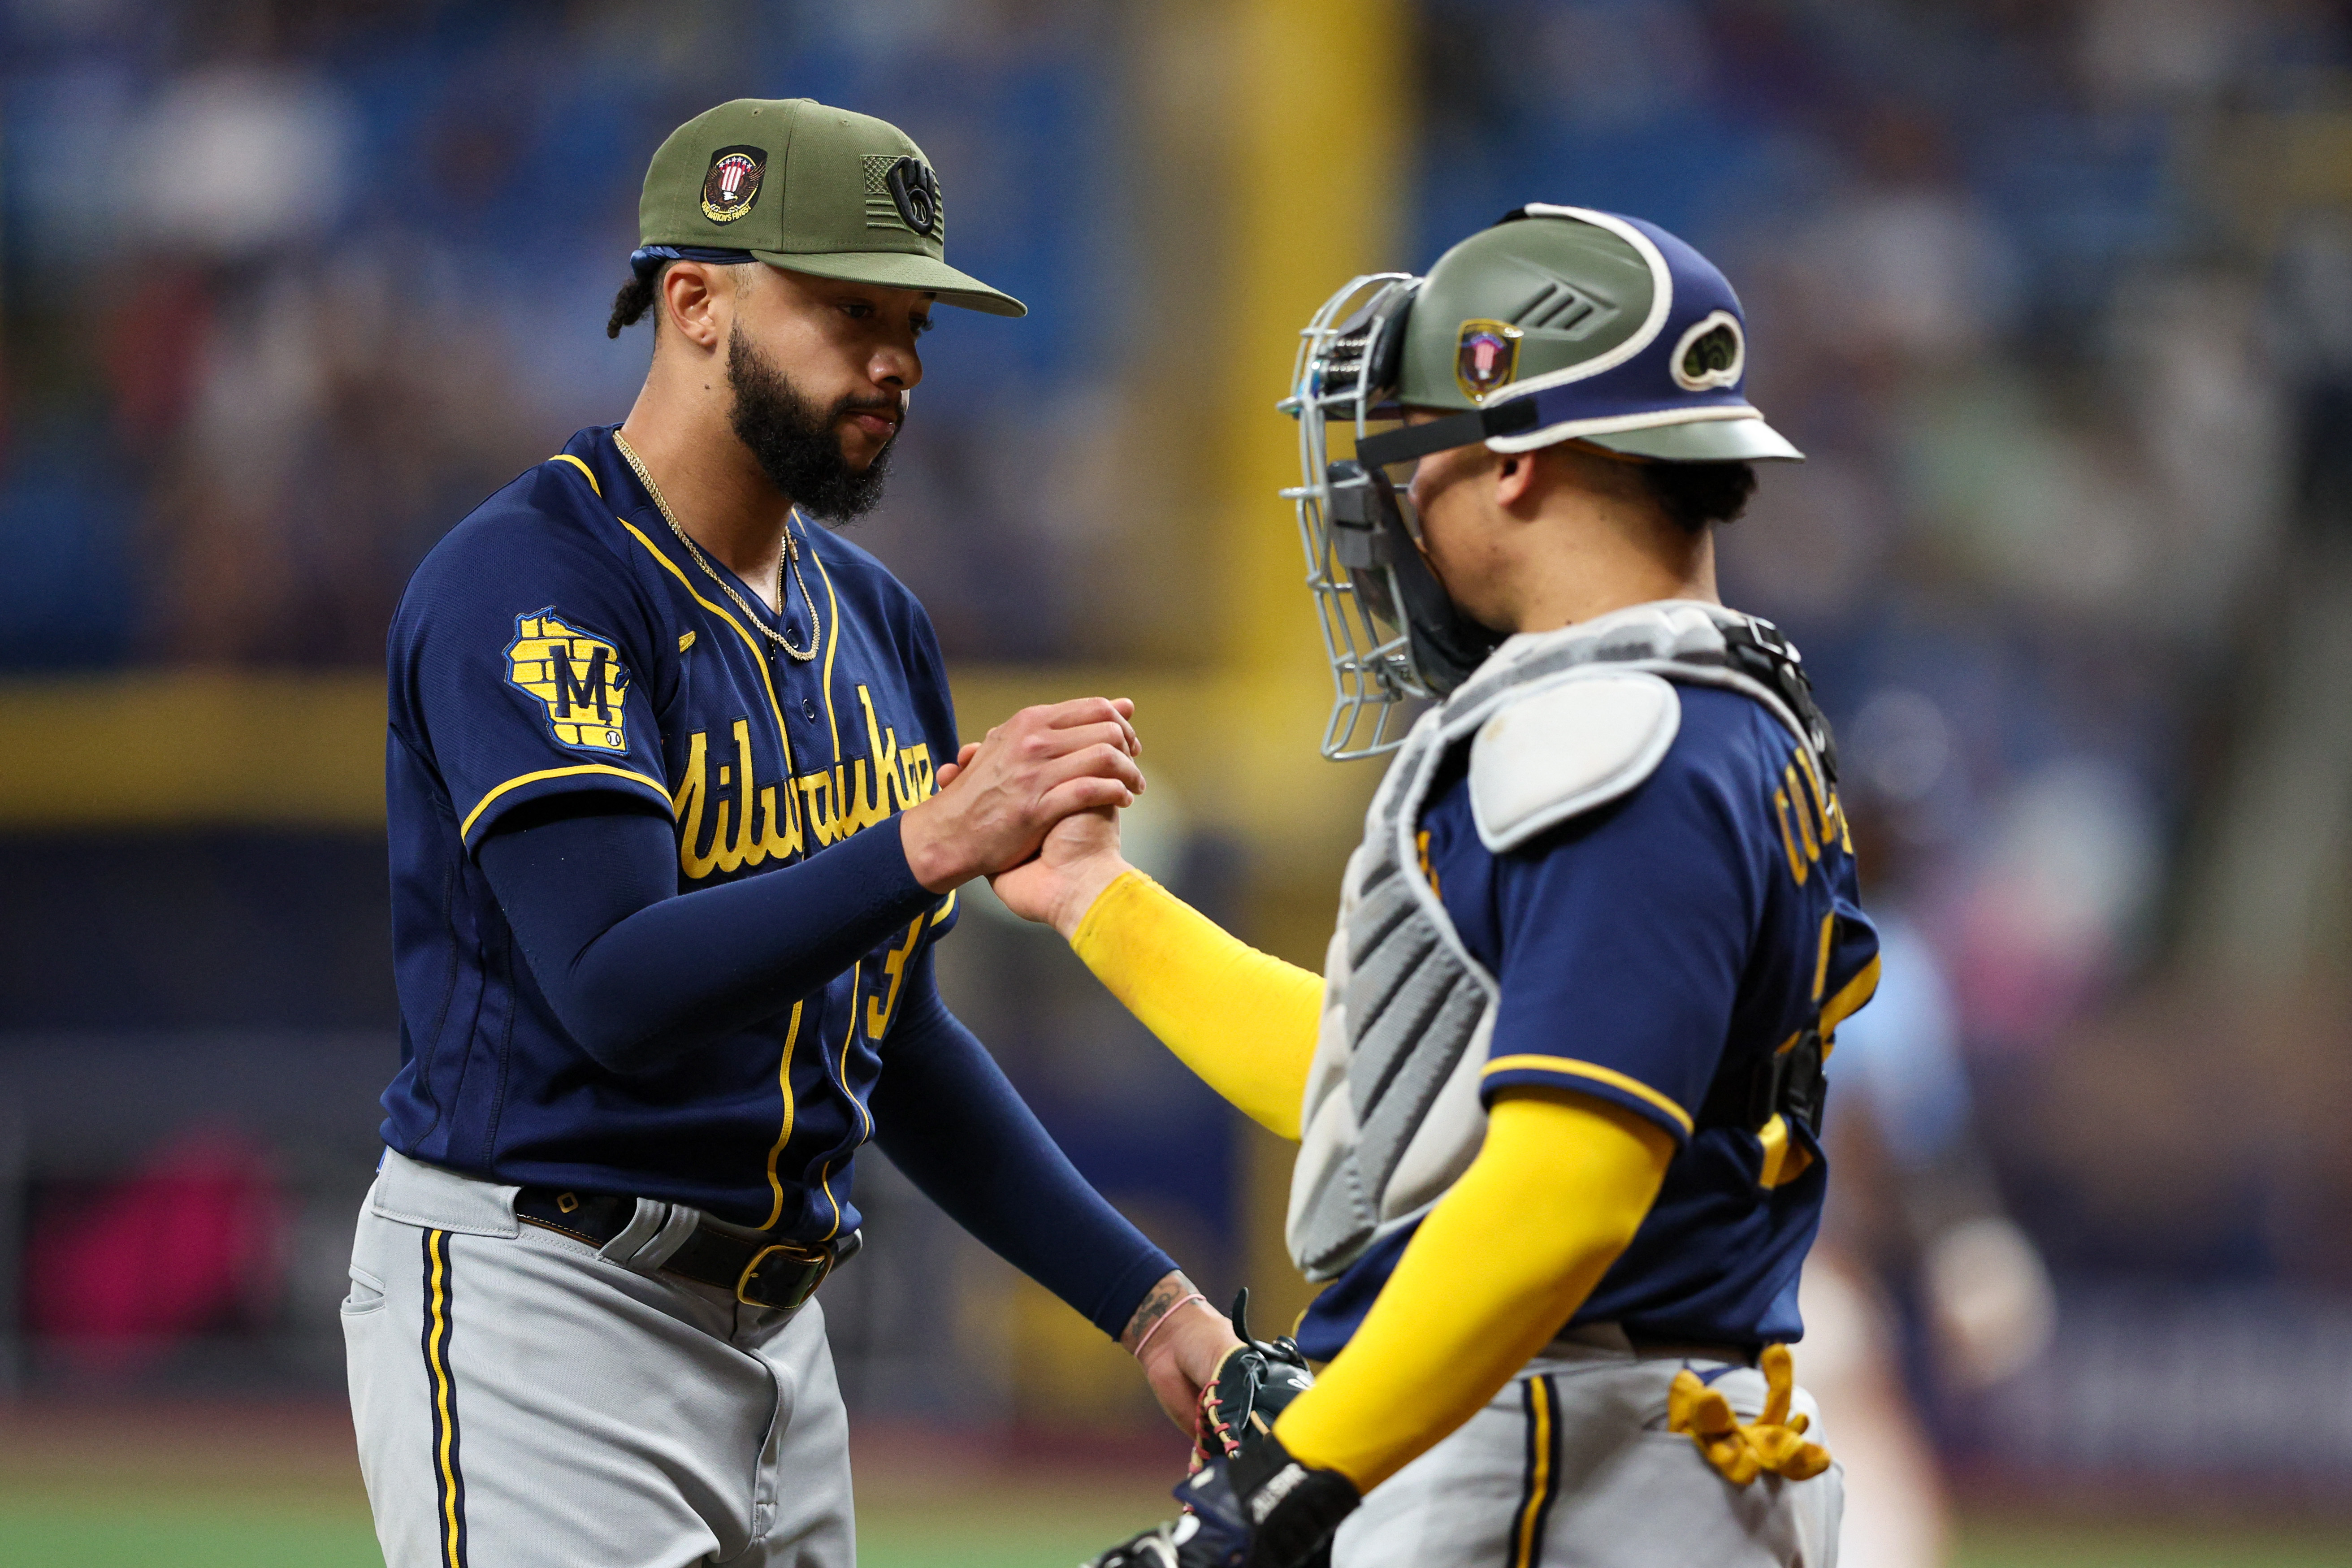 Brand New: New Logos and Uniforms for Milwaukee Brewers by Rare